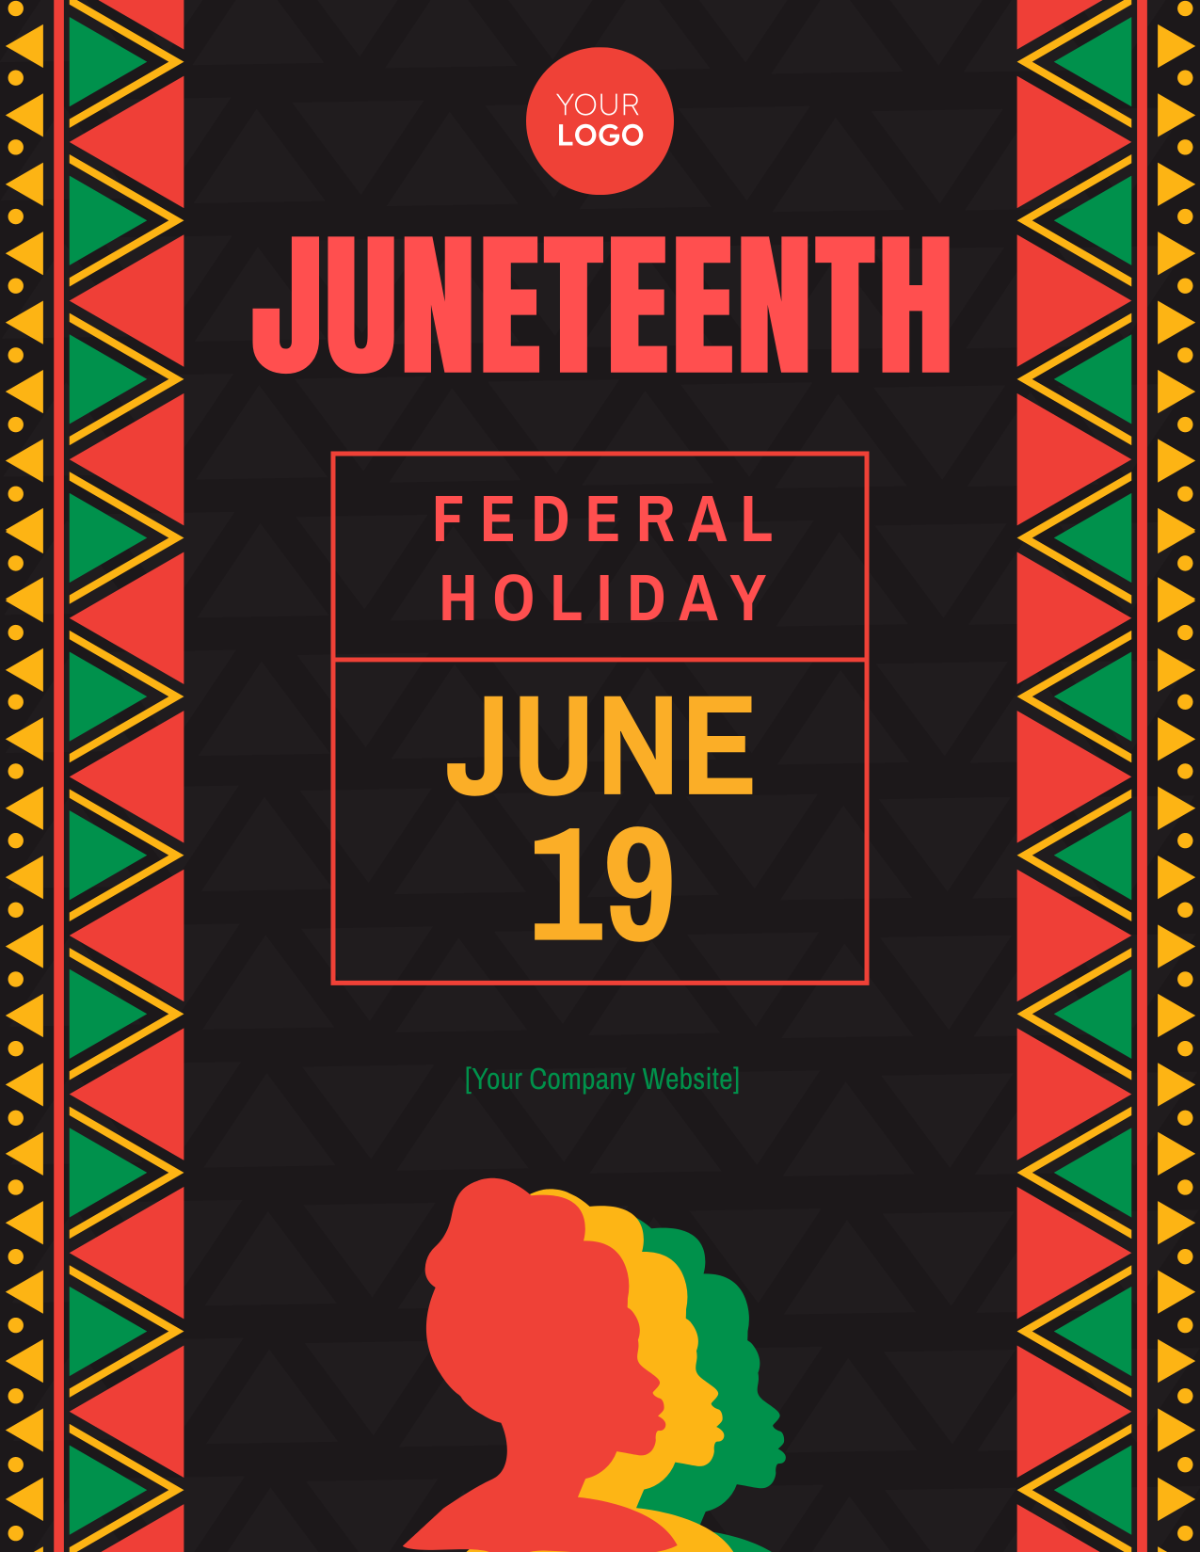 Juneteenth Federal Holiday Flyer